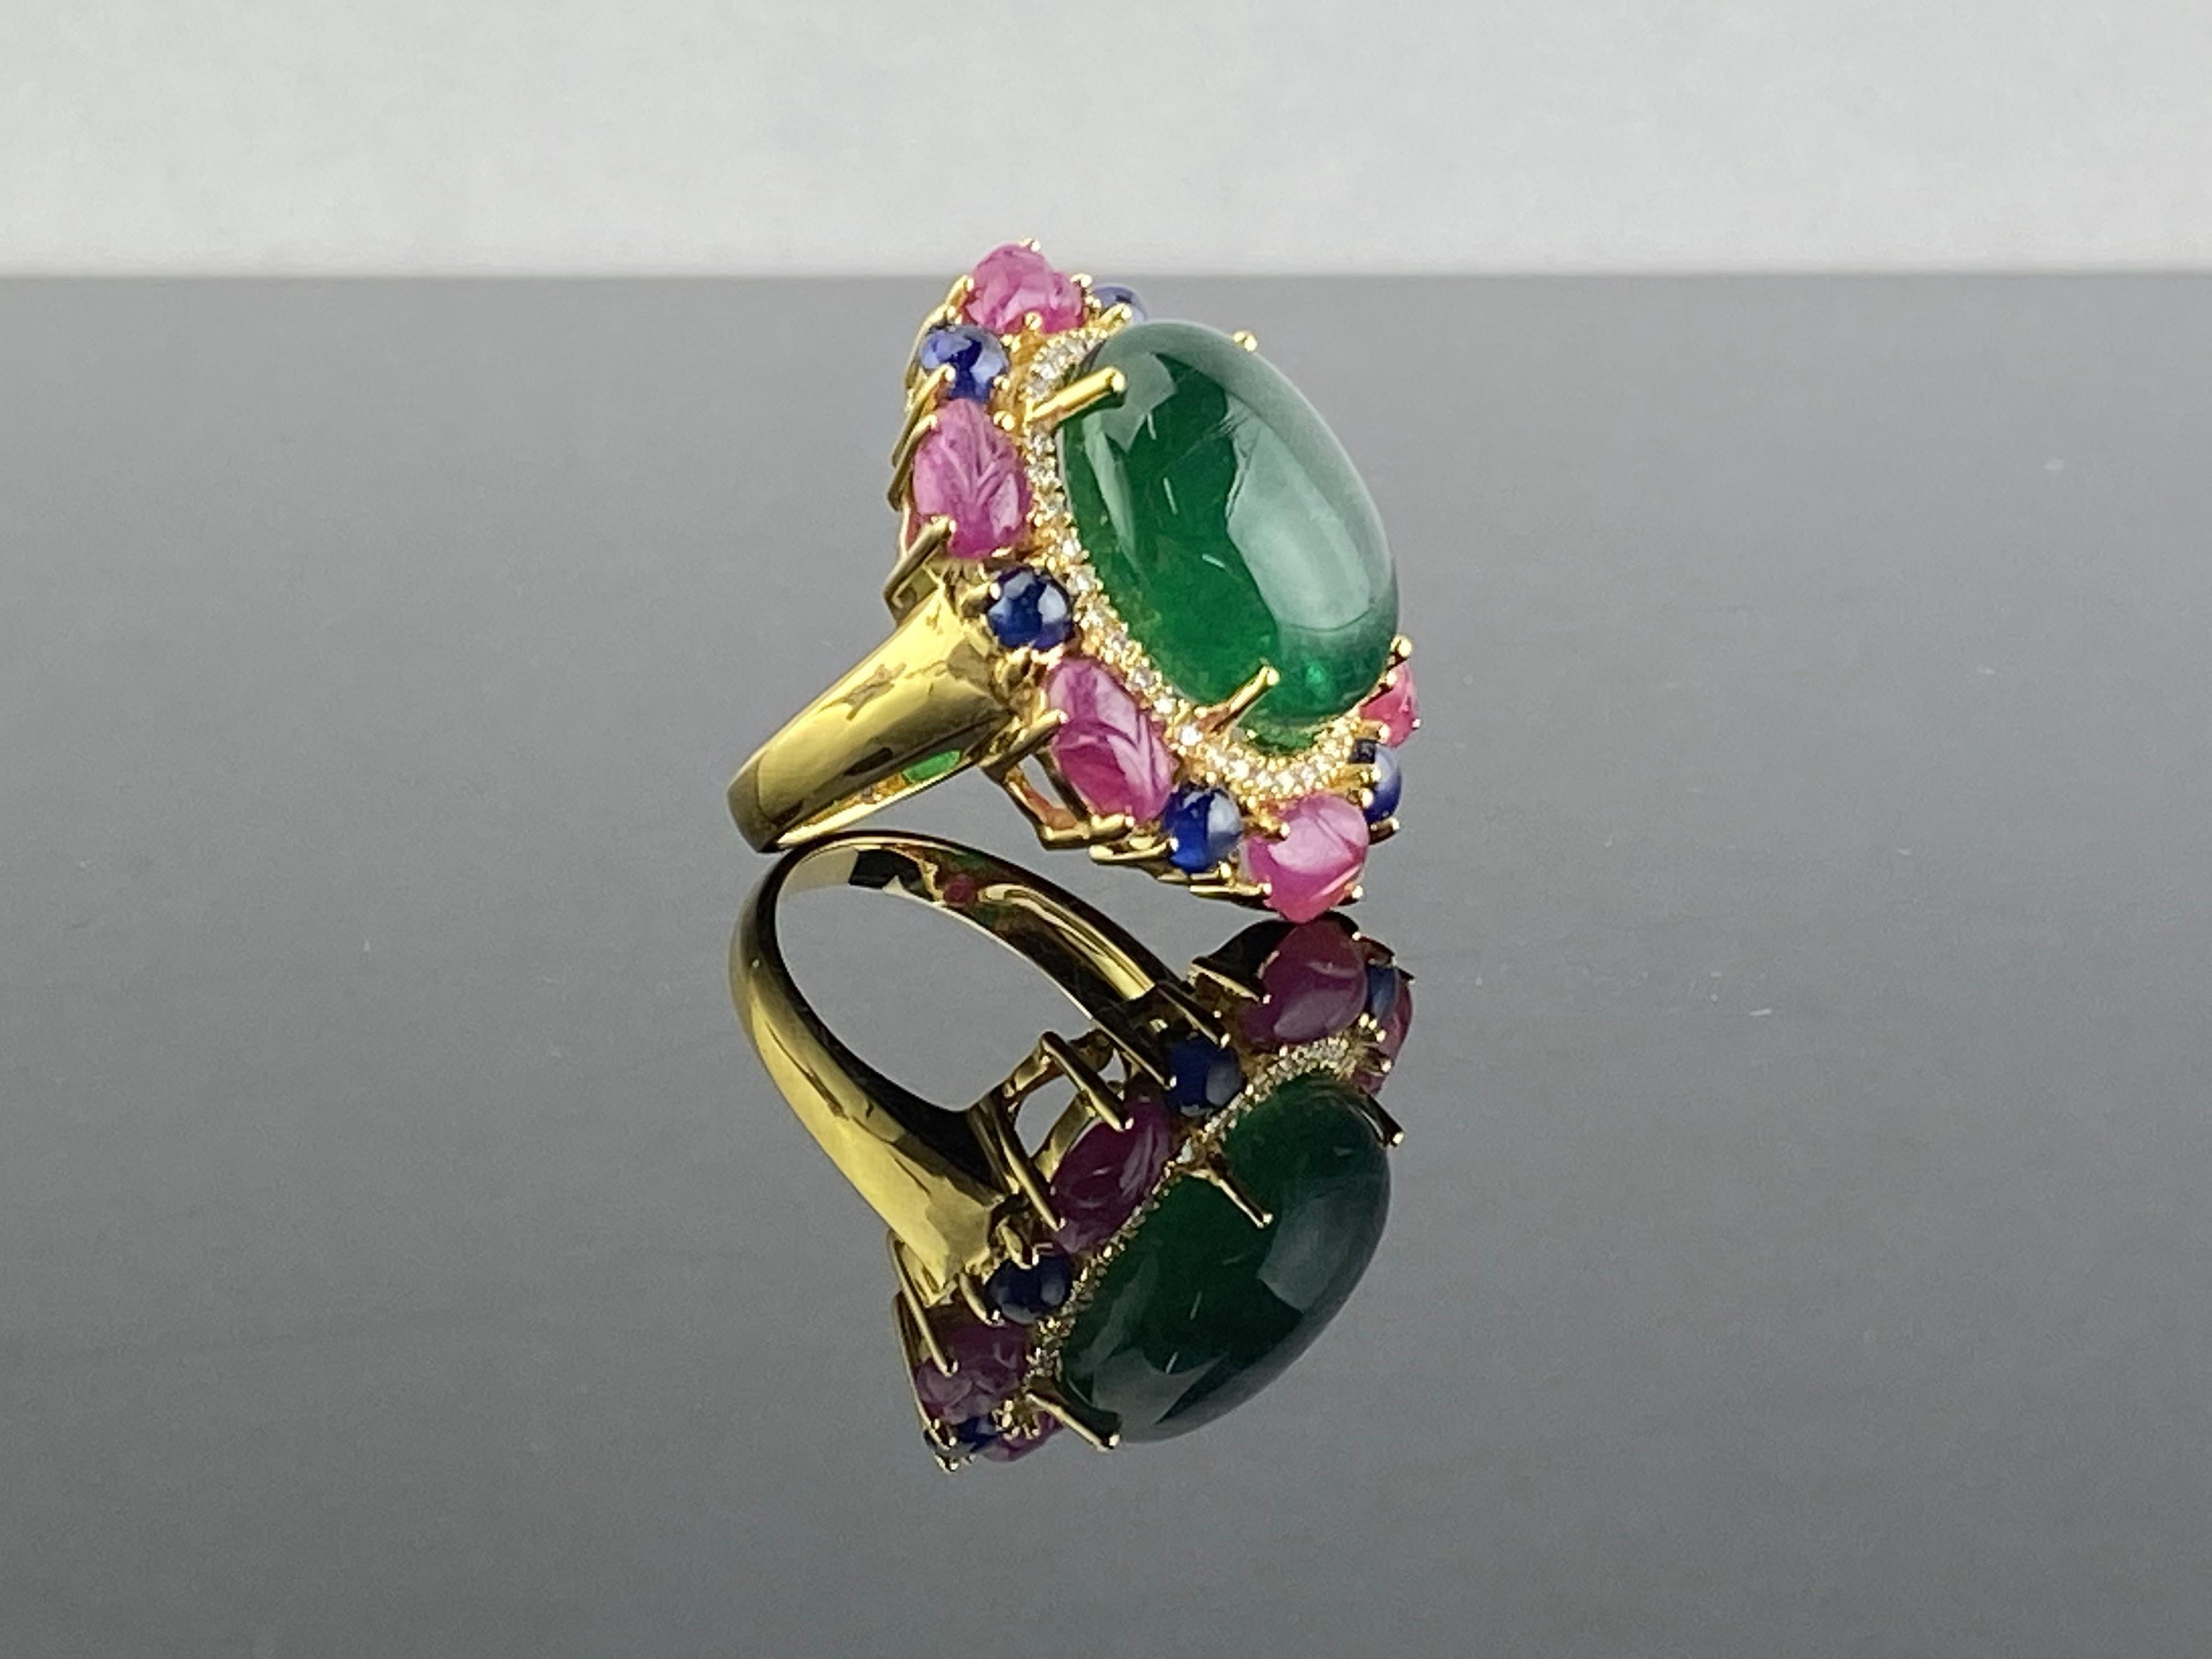 One of a kind art-deco inspired multi-gemstone tutti-frutti cocktail ring. 
A stunning 12.80 Zambian Emerald cabochon center stone (ideal vivid green color, transparent, great luster) surrounded with Diamonds, Burmese Ruby carvings, and Sapphires -